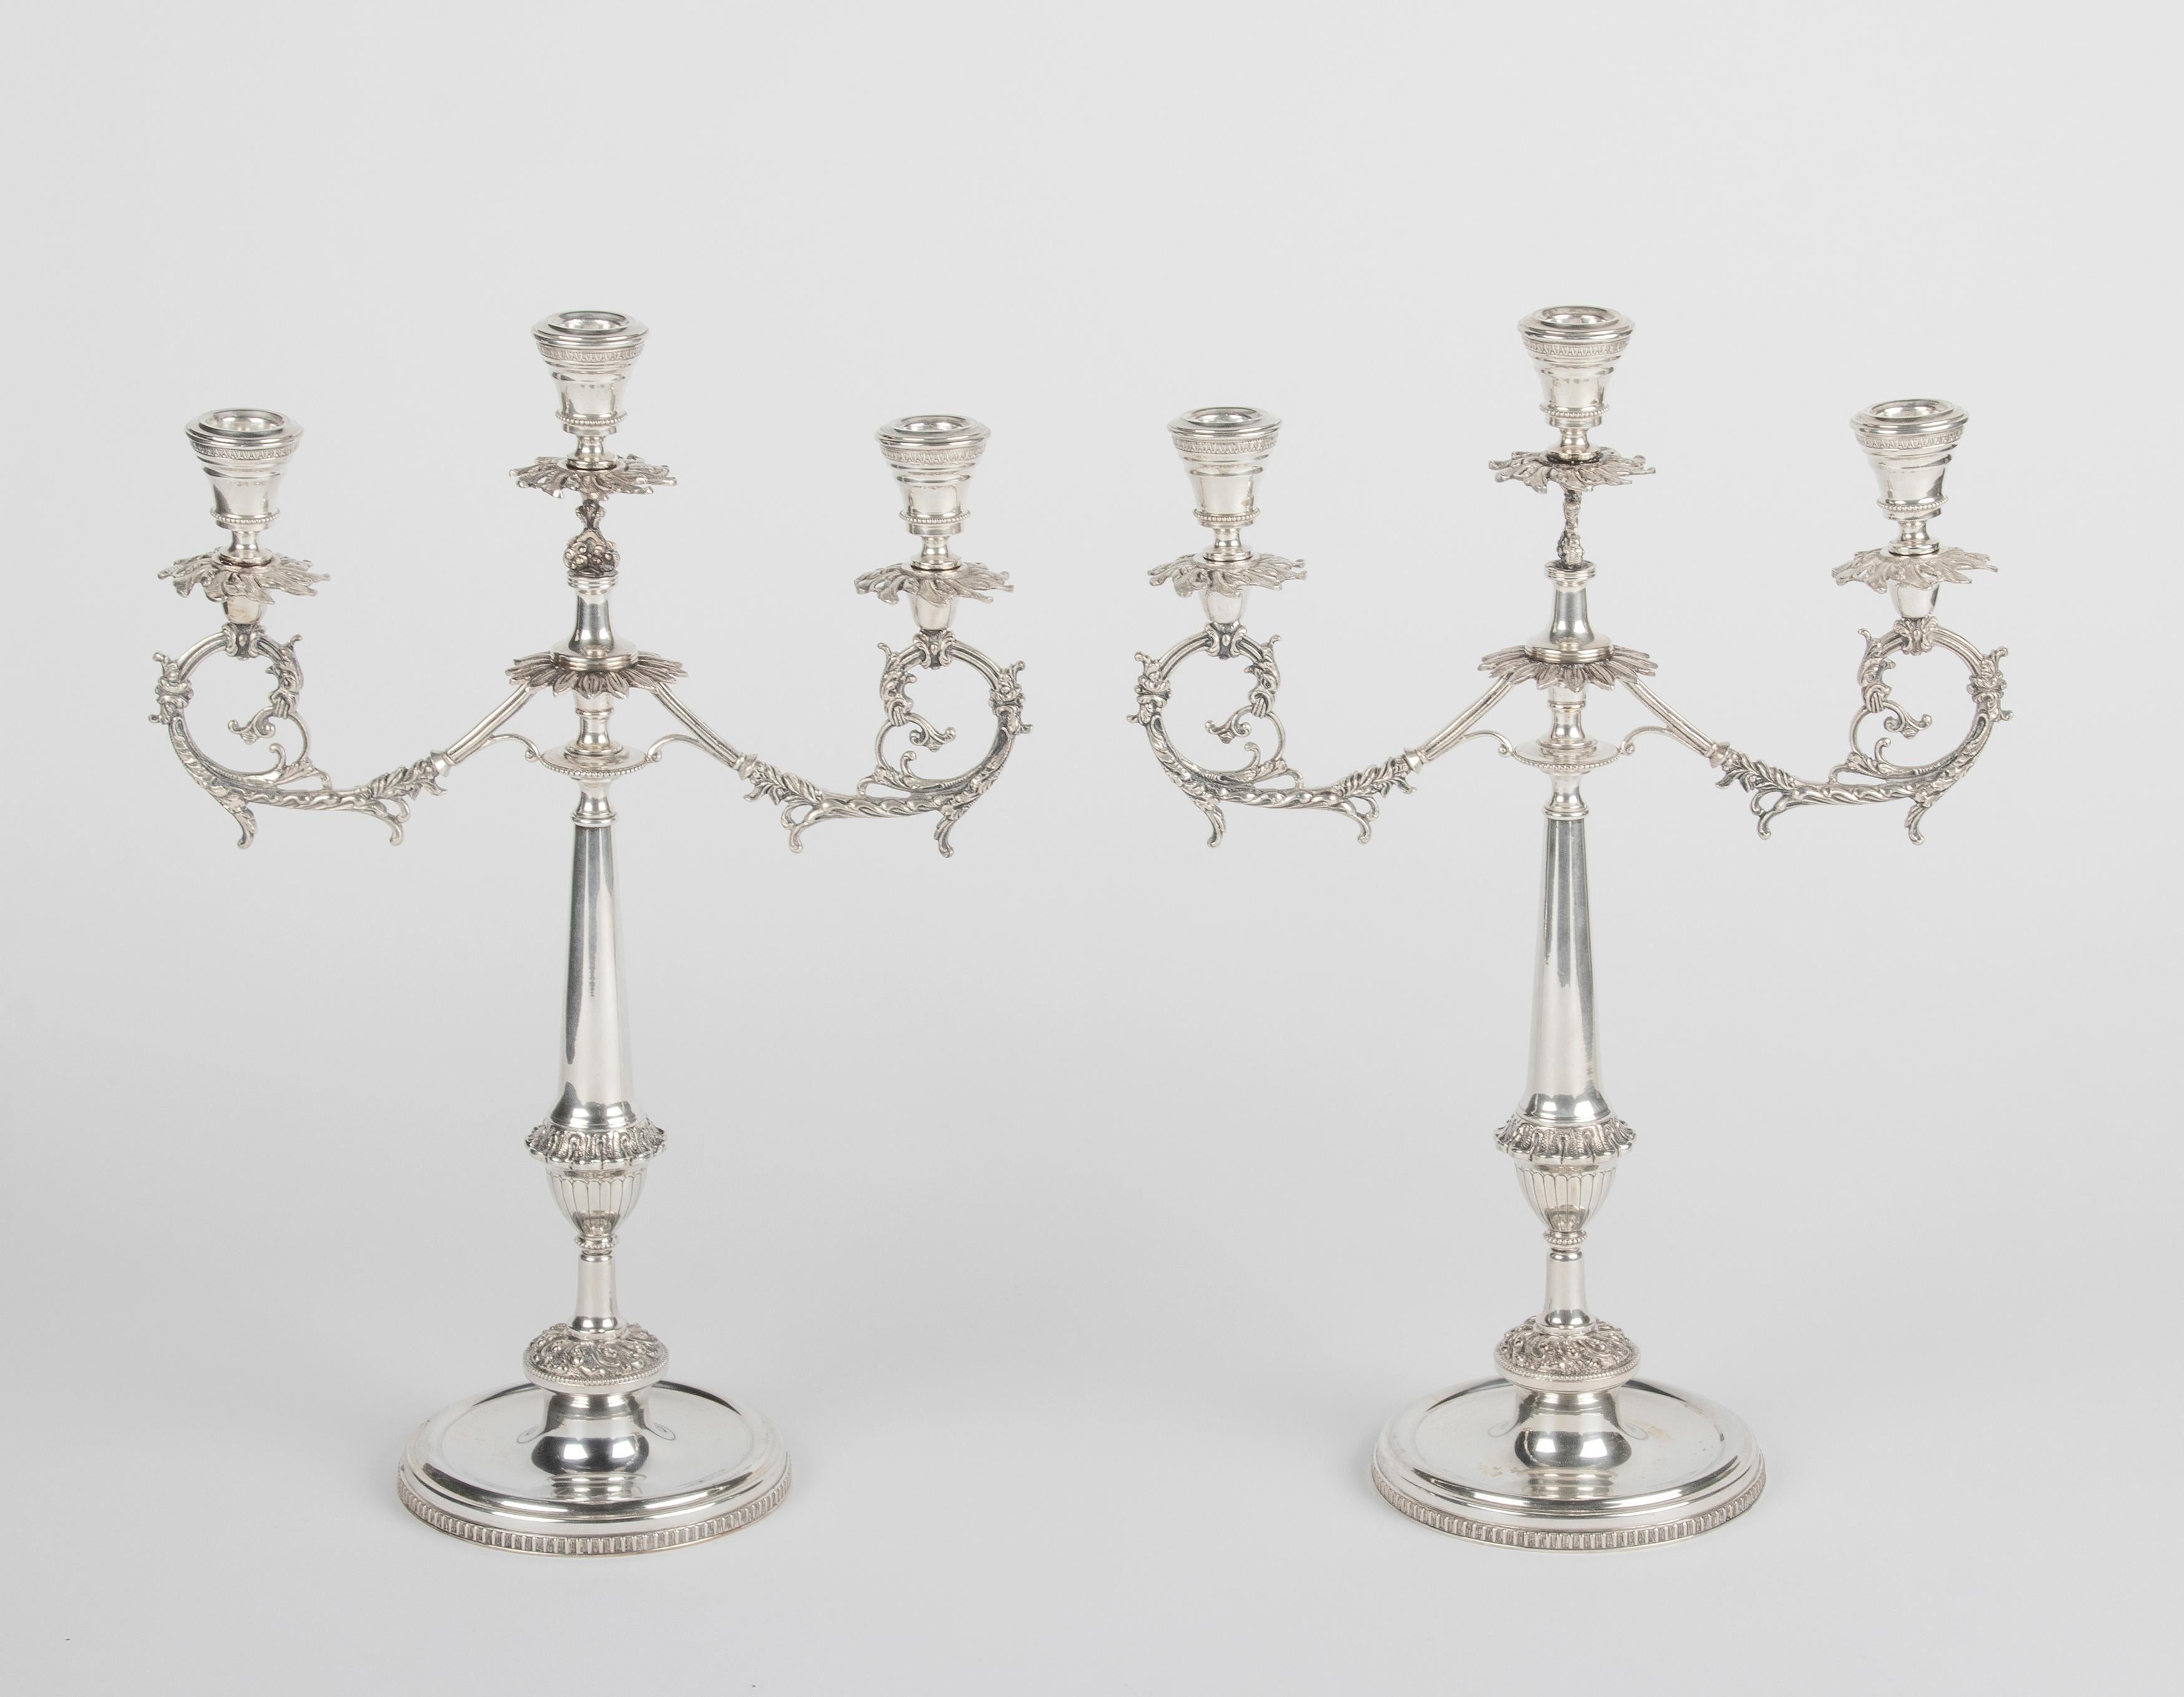 A pair of large antique silver candlesticks, beautifully decorated with ornate ornaments. The candlesticks are stamped with an 800 mark and a mark that is illegible (presumably from the maker). Very decorative objects, each candlestick has room for